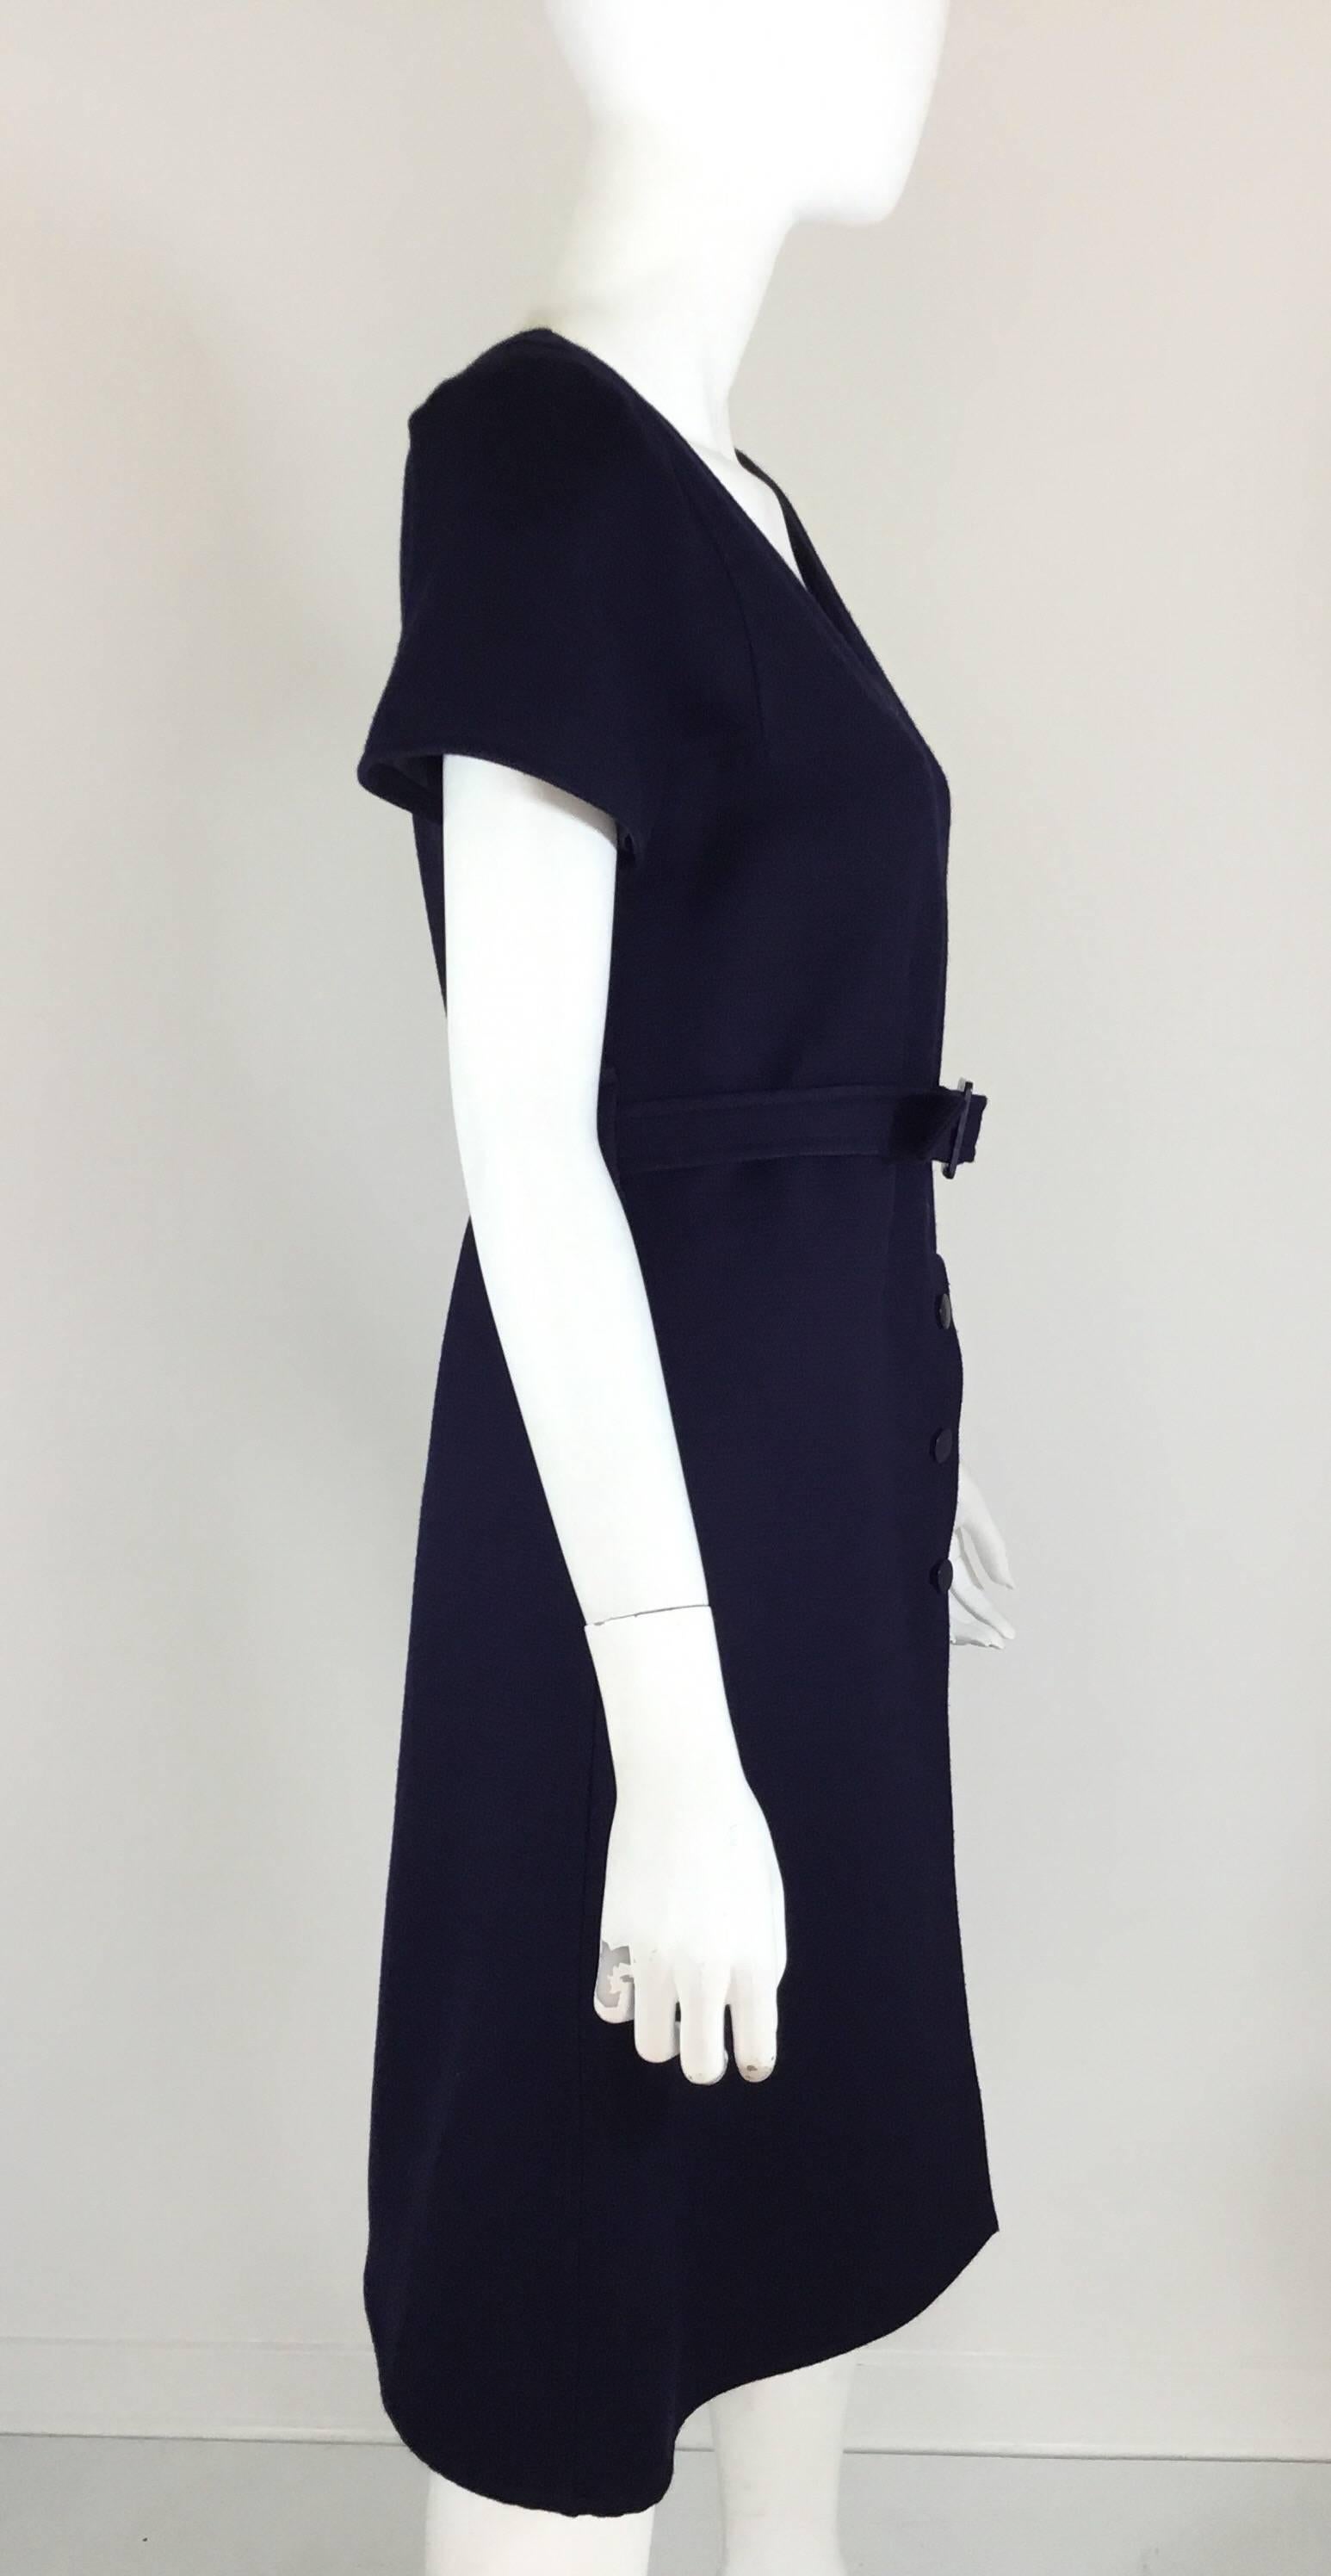 Courreges 1970s A-line structured wool dress in navy features a belted waist with a zipper and button front closure. Dress is fully lined, made in France and labeled Couture Future size A.

bust 35'', waist 30'', hips 40'', length 36''